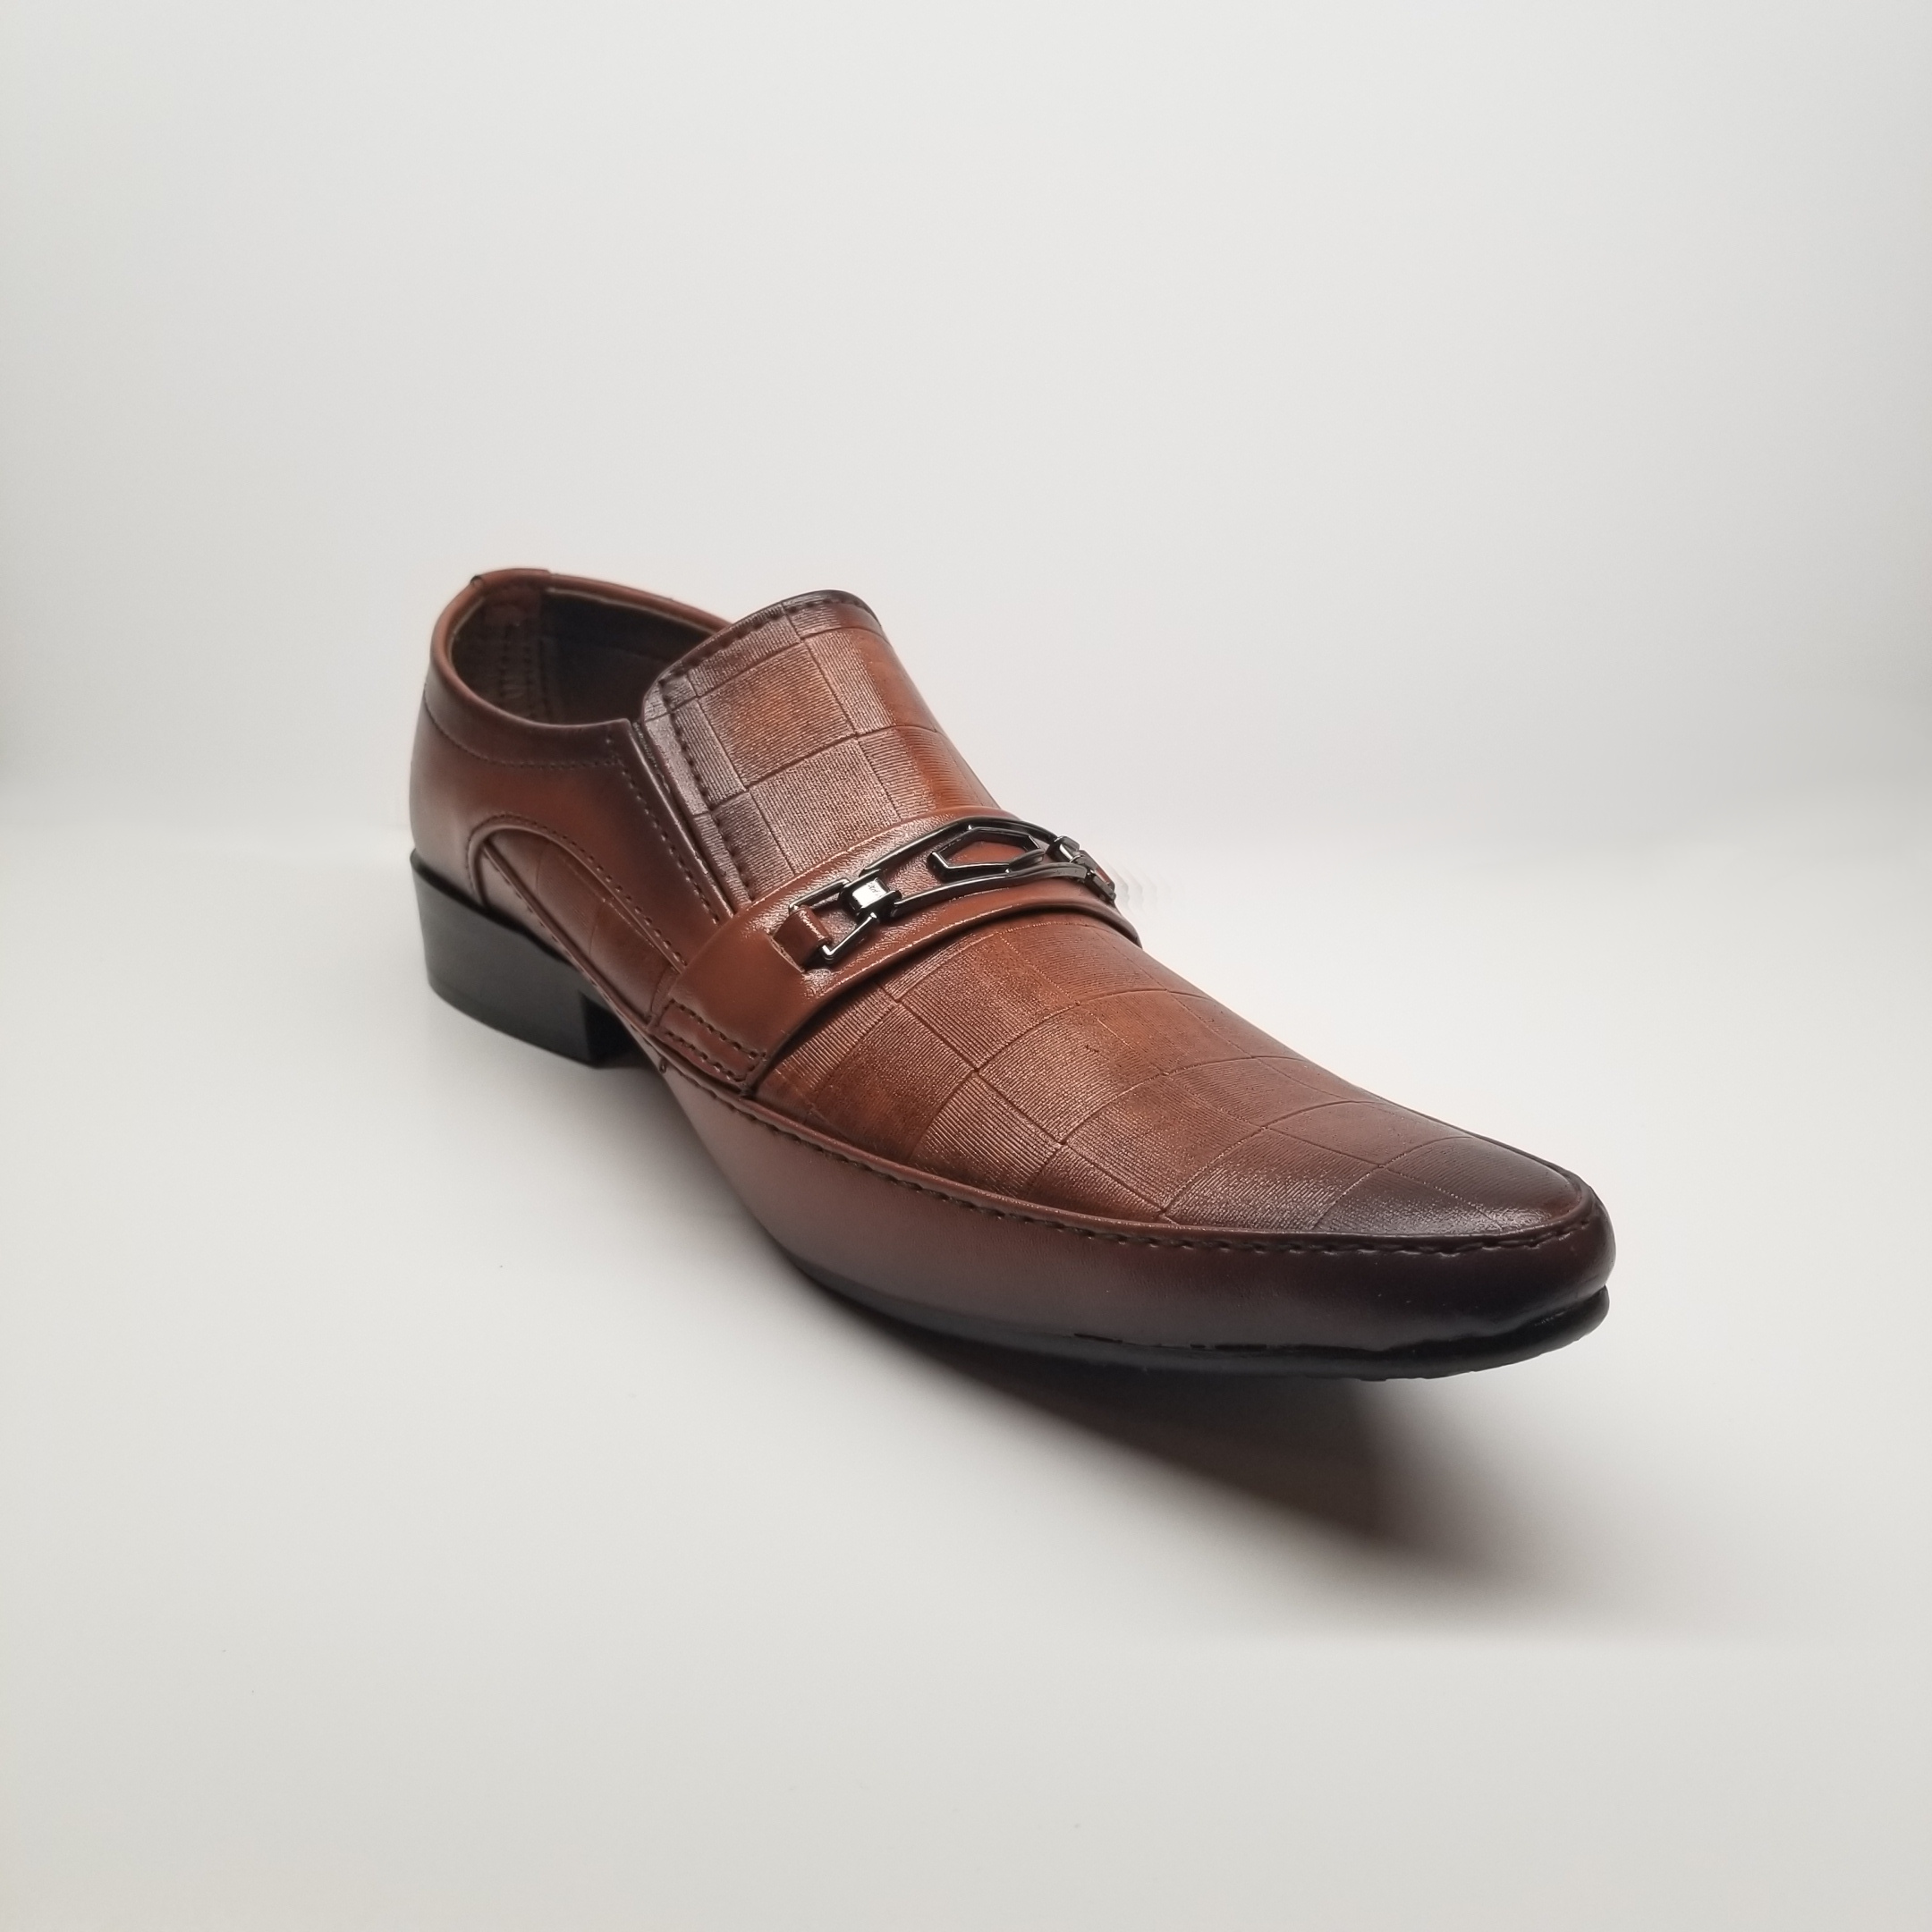 Chess Master dress shoes by Walkies at NMFootwear.com